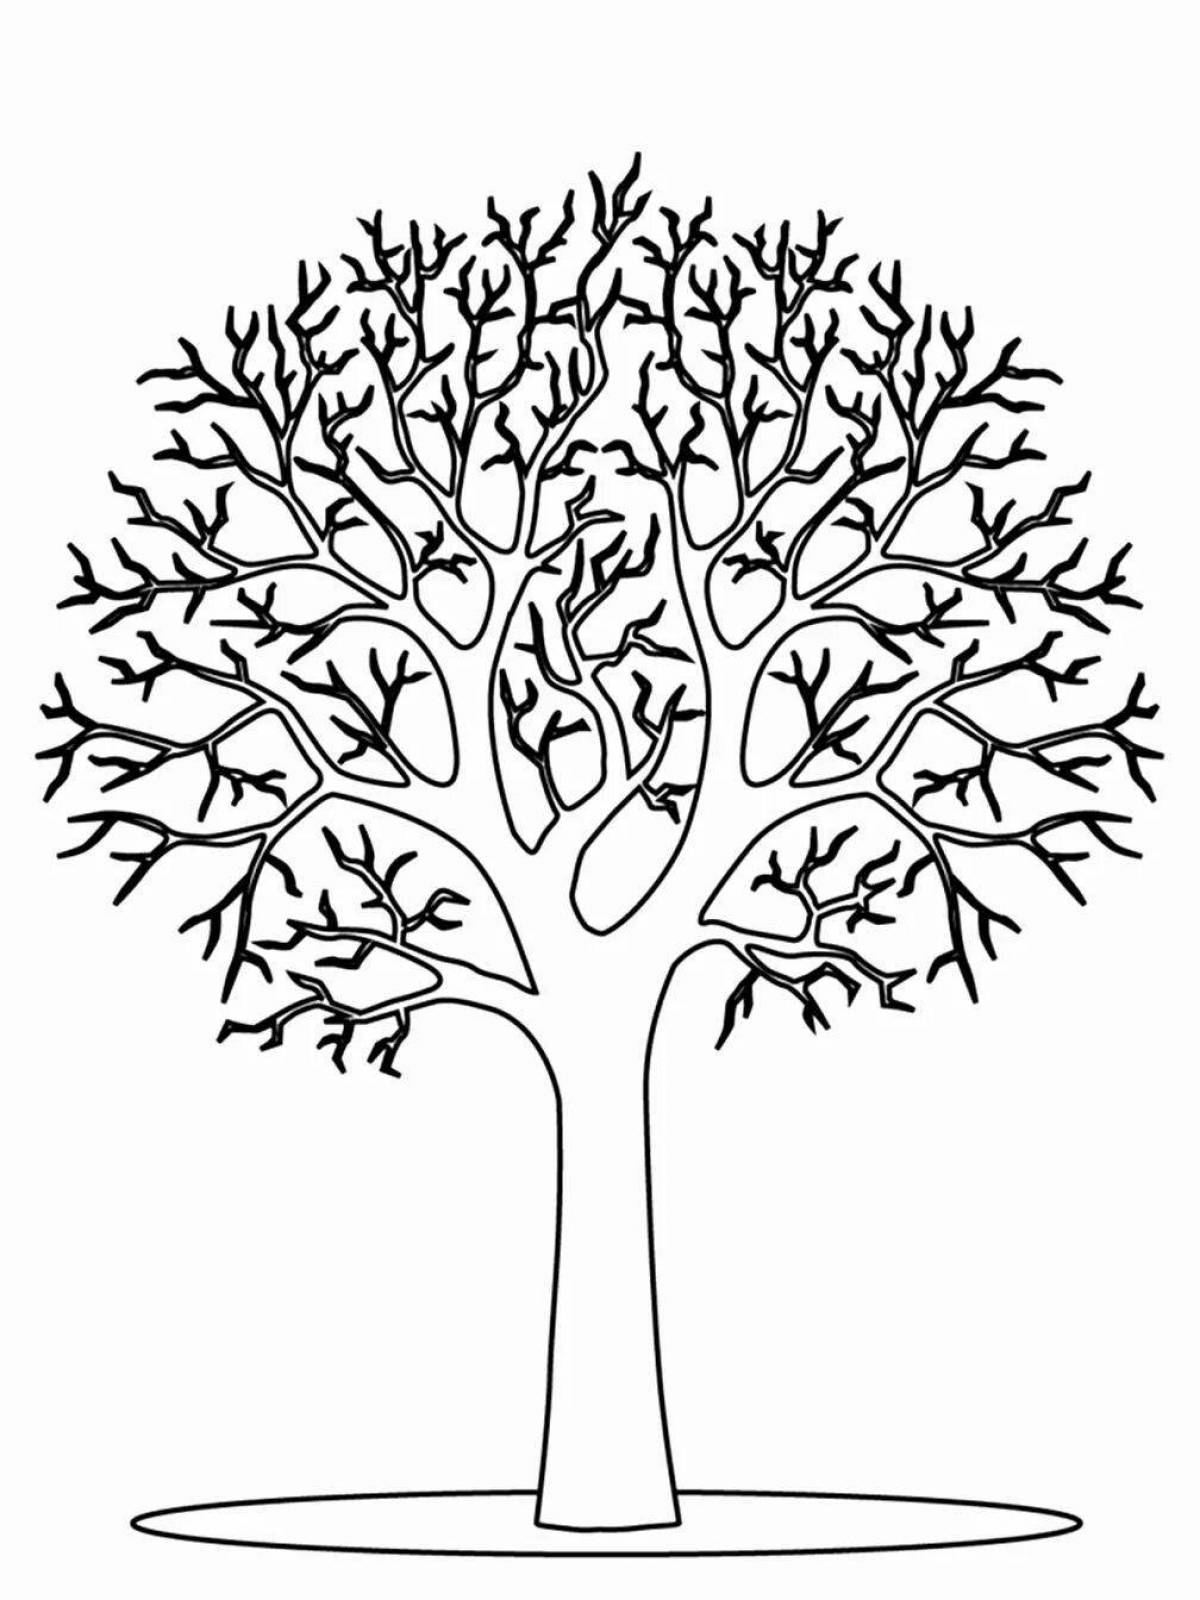 Joyful tree trunk coloring page for babies